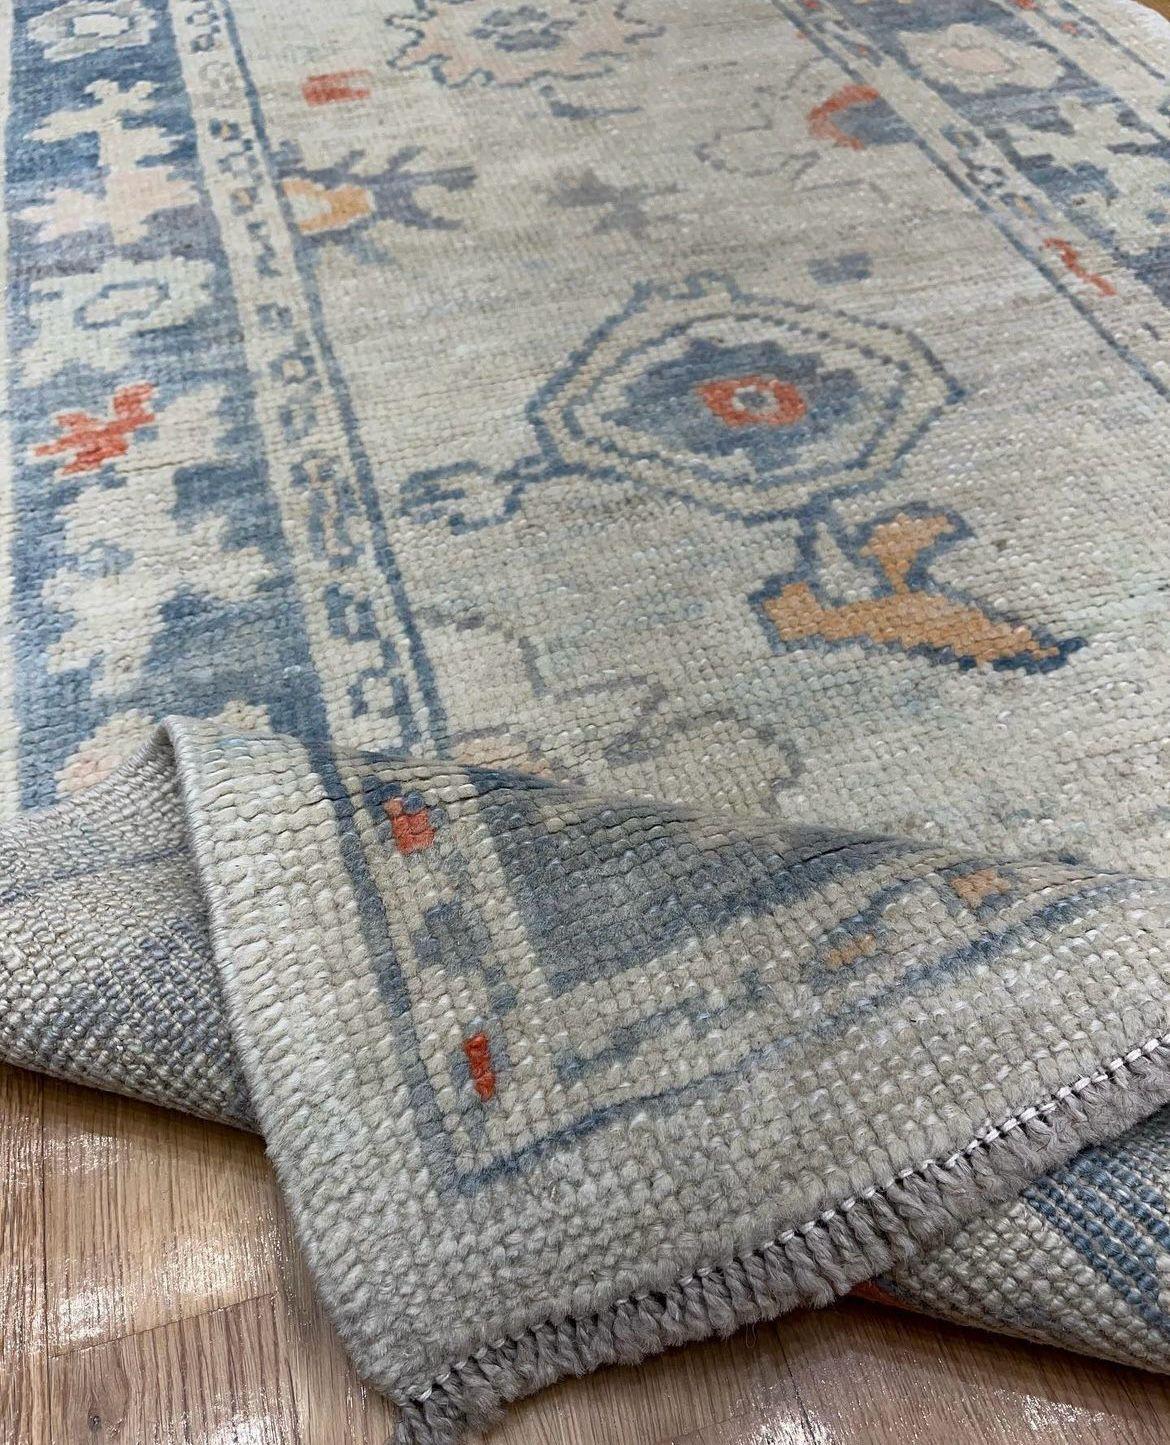 Handwoven Wool Turkish Oushak Runner 2’9” x 9’5” #CB02 In Excellent Condition For Sale In Houston, TX